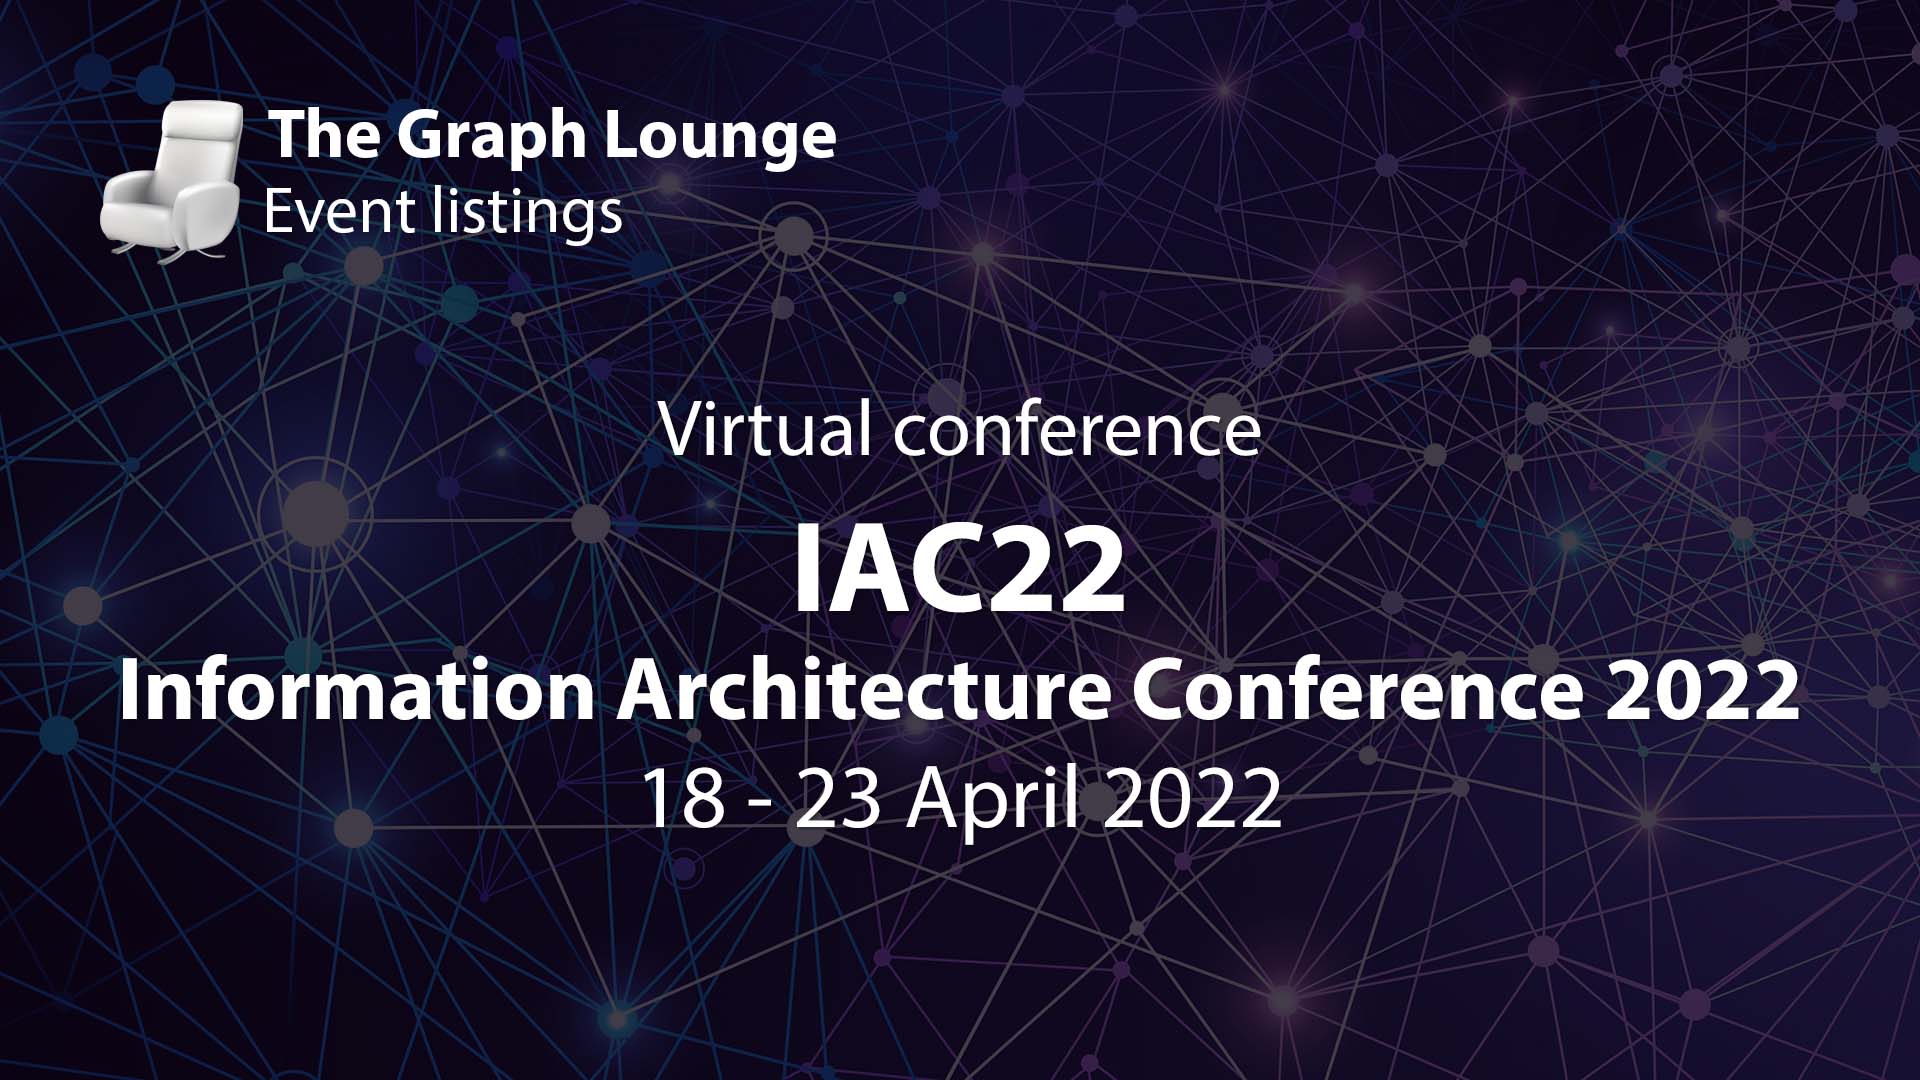 IAC22 (Information Architecture Conference 2022)